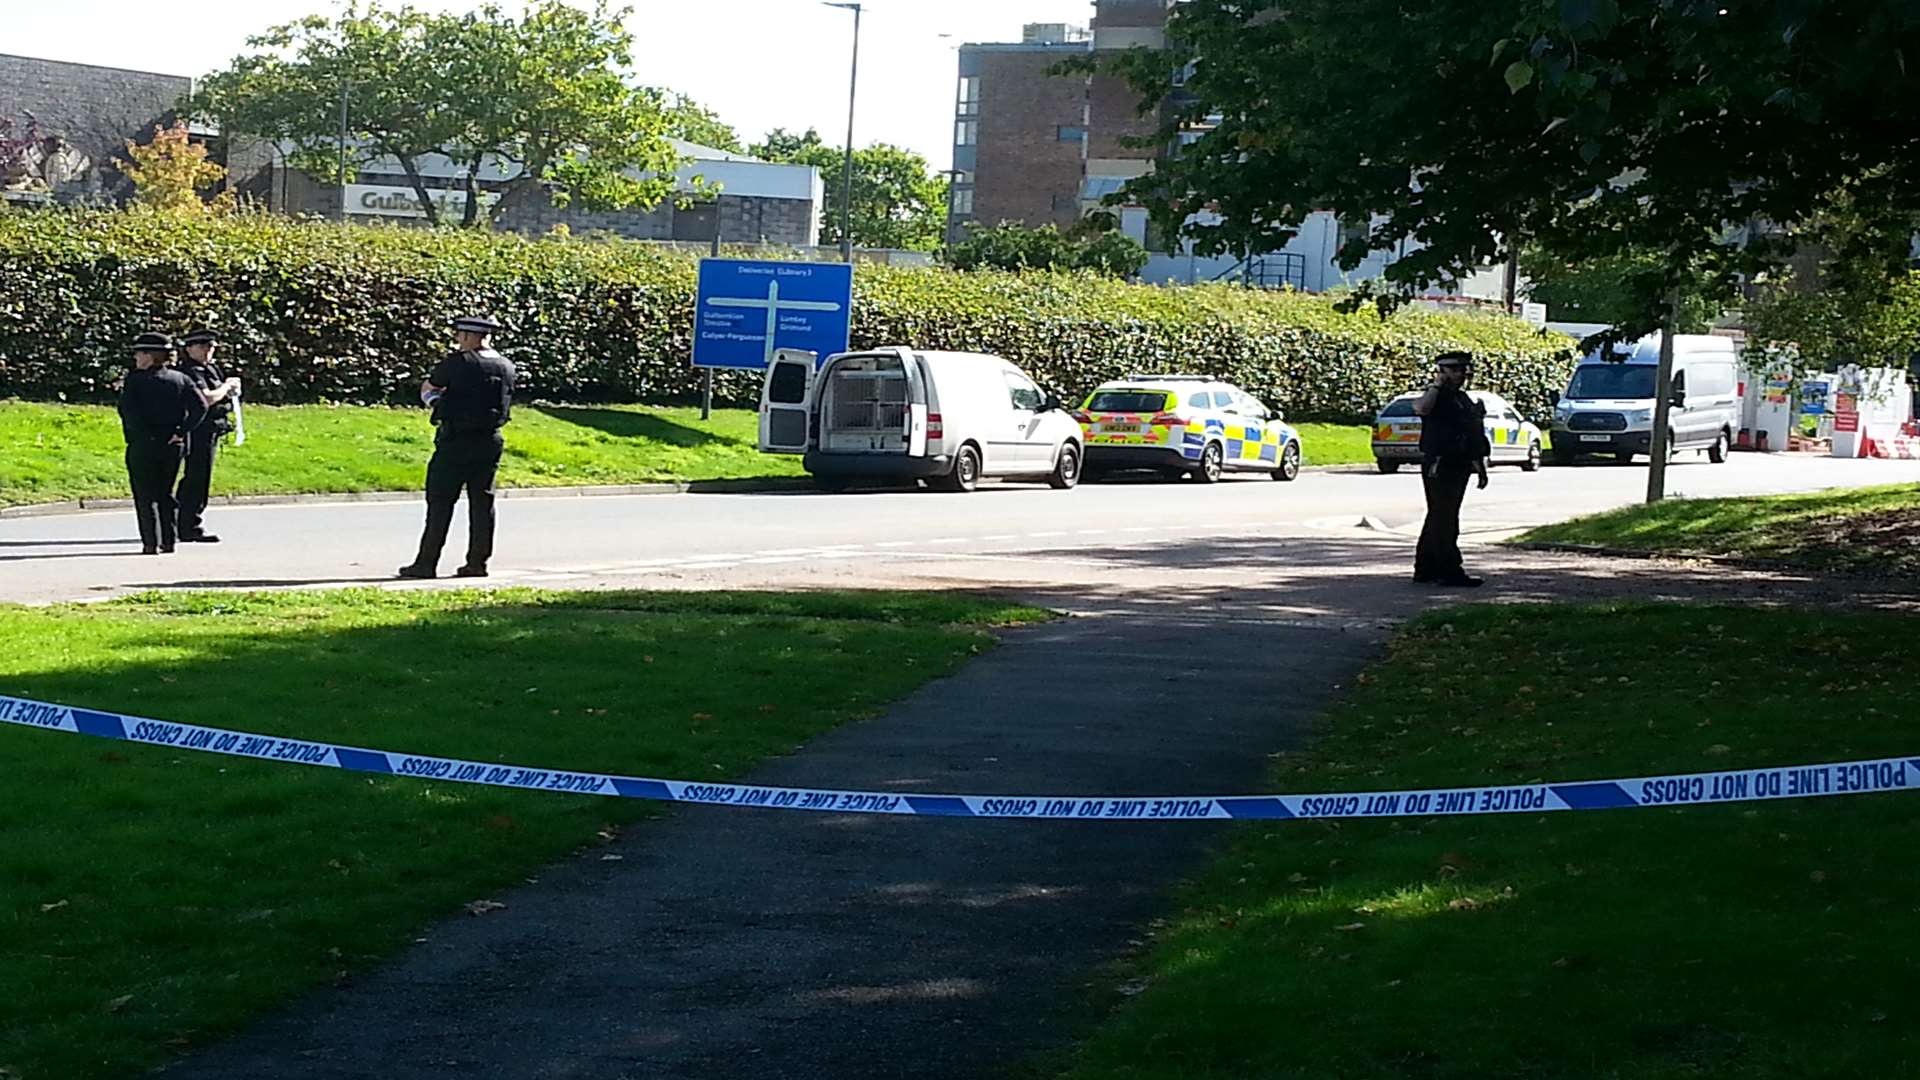 Areas of the university have been cordoned off